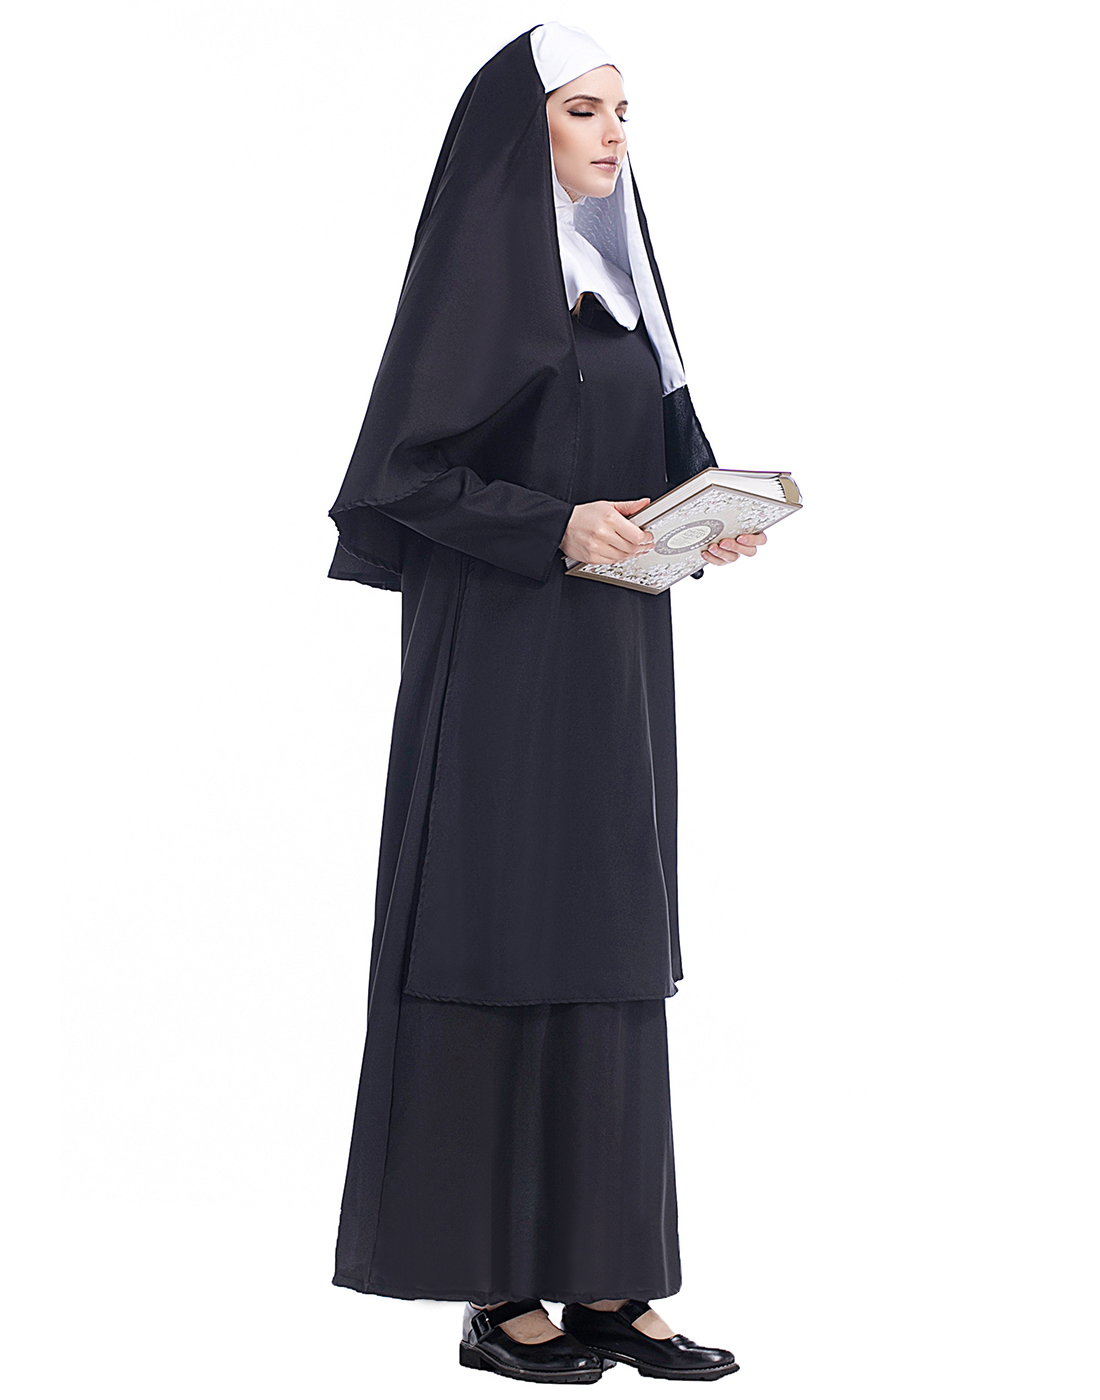 HDE Nun Costume for Women Traditional Adult Sister Black Robe and Habit Religious Halloween Costumes - image 3 of 4